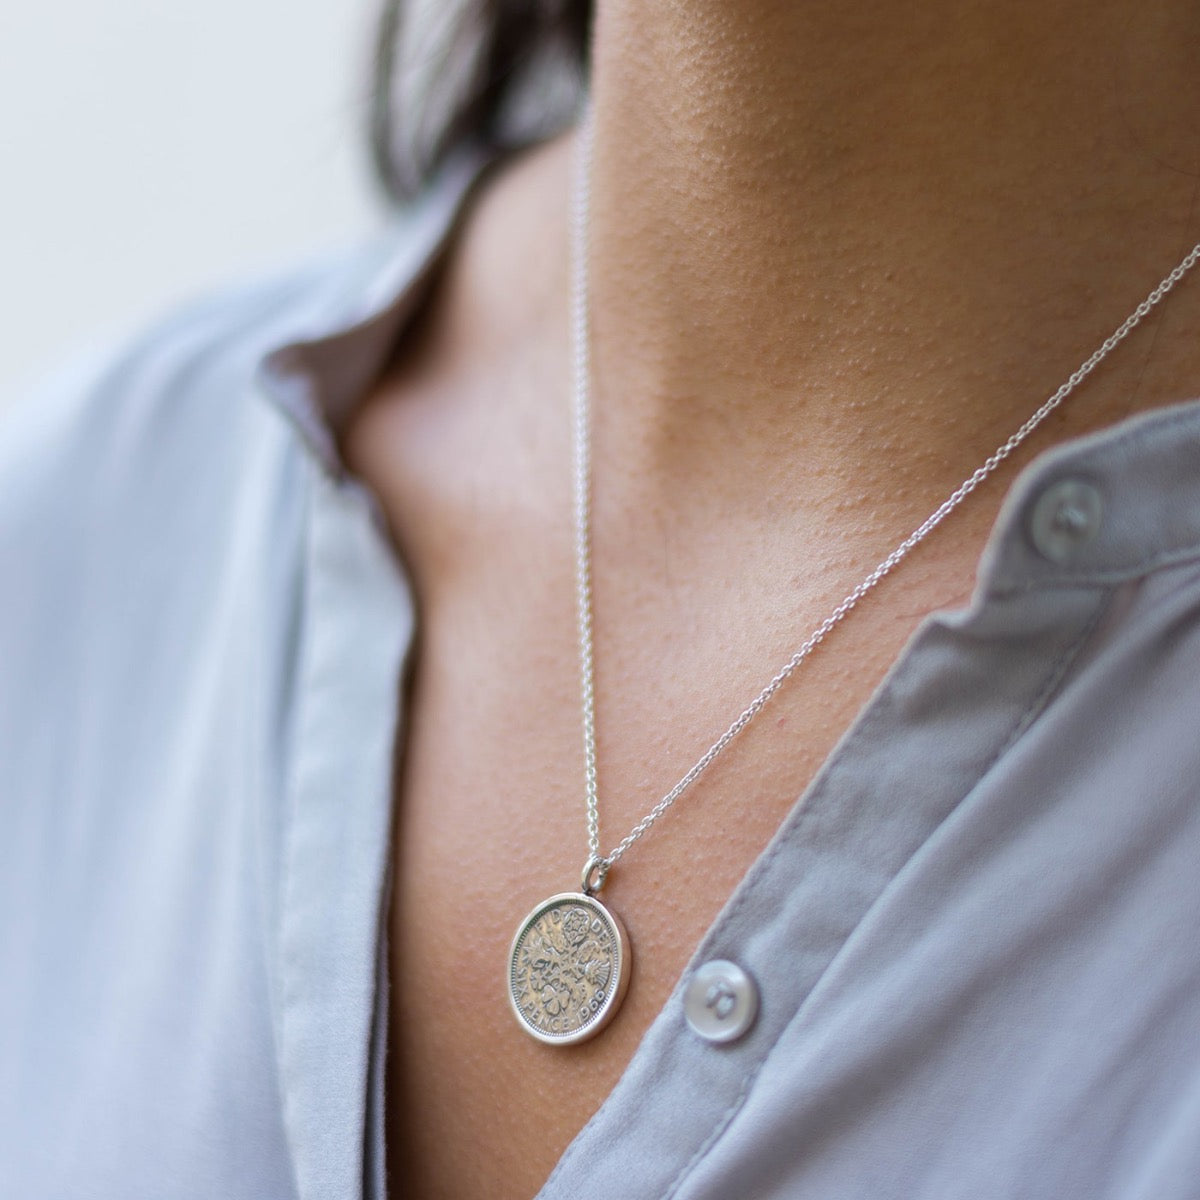 Silver lucky sixpence necklace